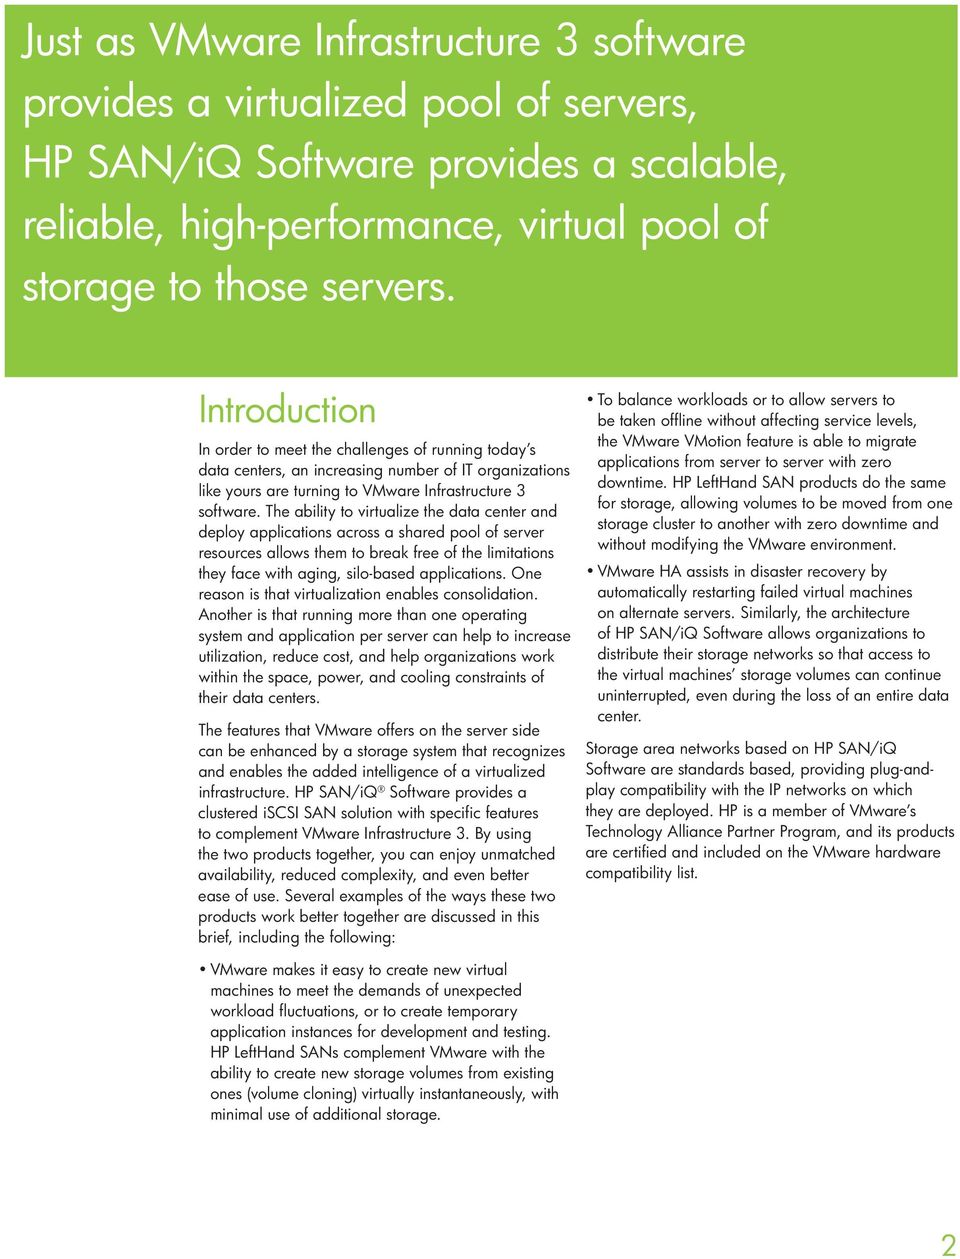 The ability to virtualize the data center and deploy applications across a shared pool of server resources allows them to break free of the limitations they face with aging, silo-based applications.